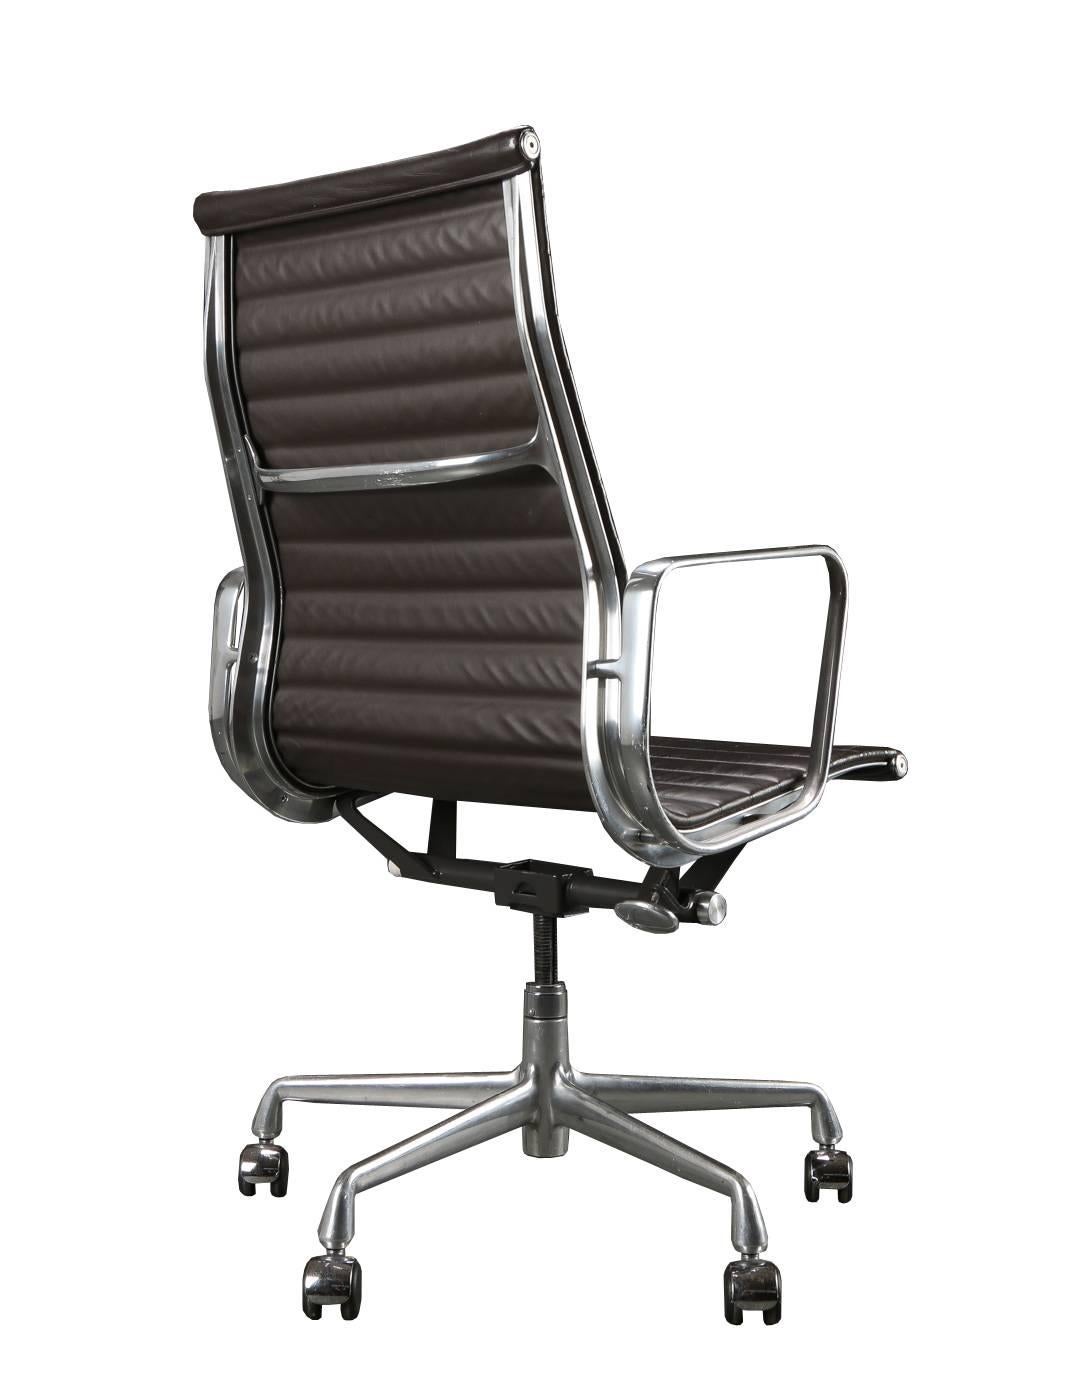 Mid-20th Century Aluminium Series Office Chair by Charles and Ray Eames